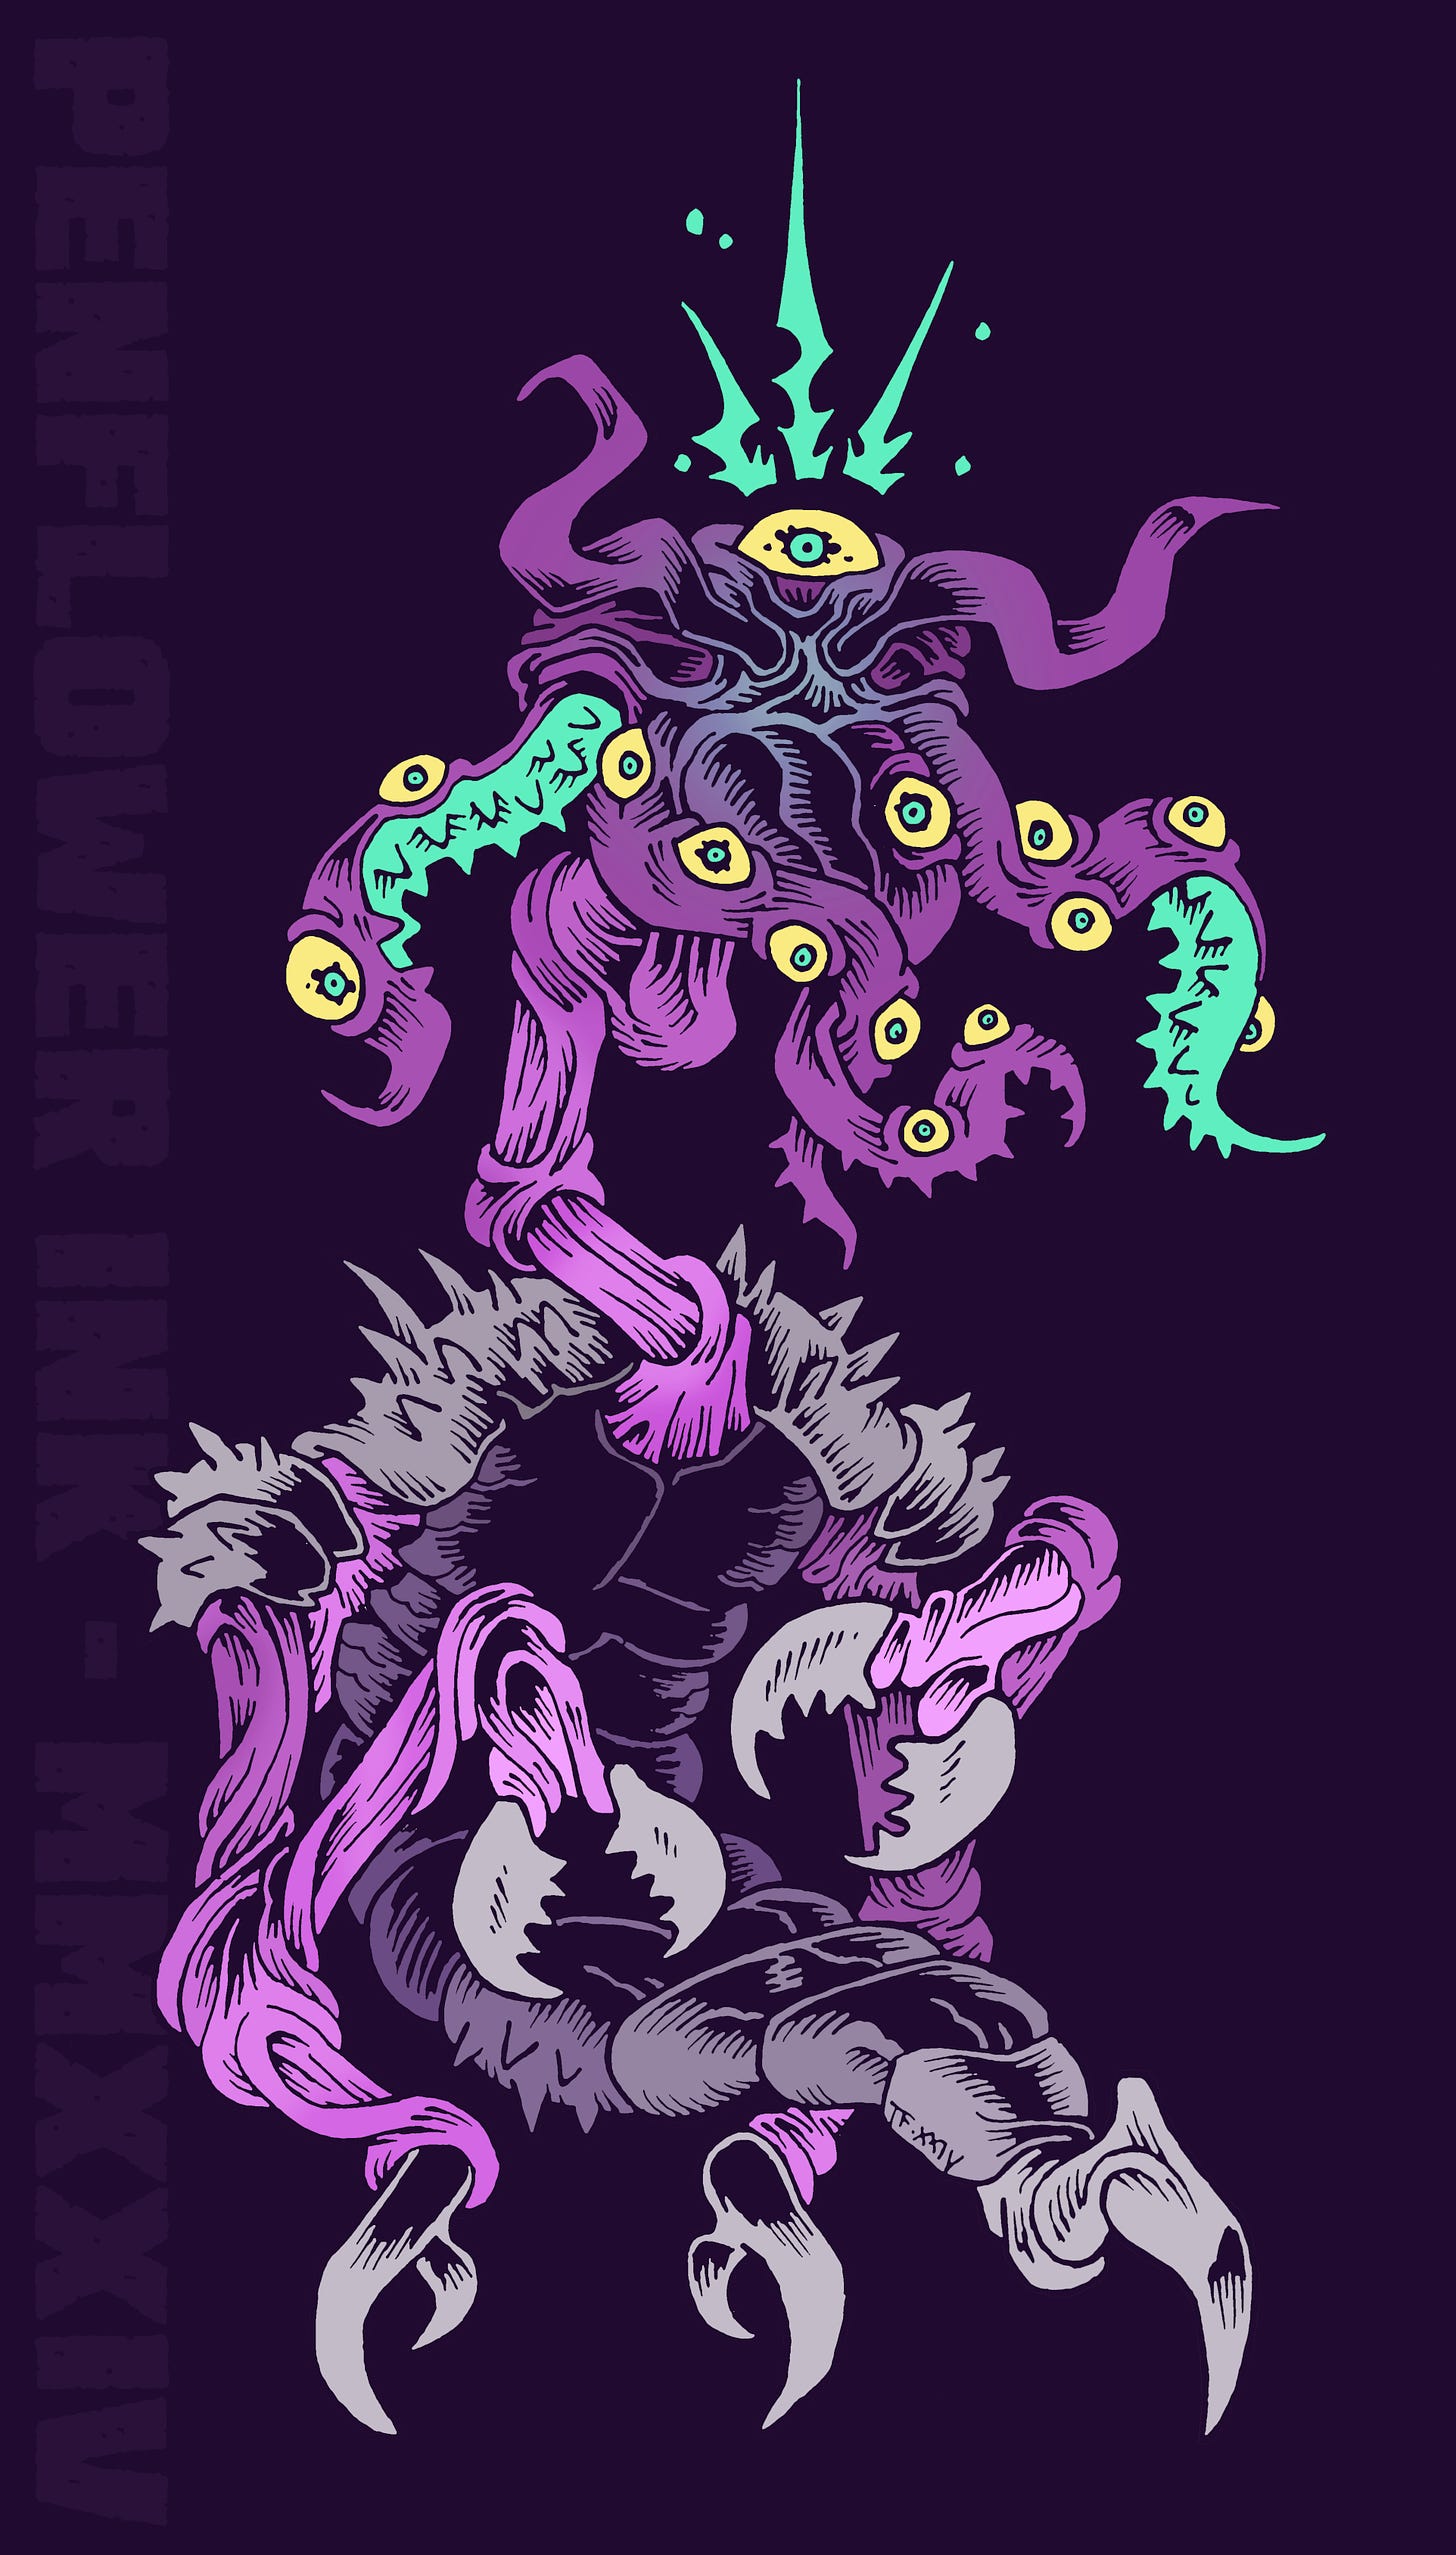 Traditionally hand drawn and digitally coloured illustration of an eldritch creature. Its purple and pink body is segmented and armoured like that of a crustacean, with three articulated legs / arms ending in large pointy claws. Atop a long, zig-zagging neck is a large head, a knot of spiky tentacles, each one covered in large yellow eyes. It has one much larger eye at the center of its forehead, from which a bright blue emanates.